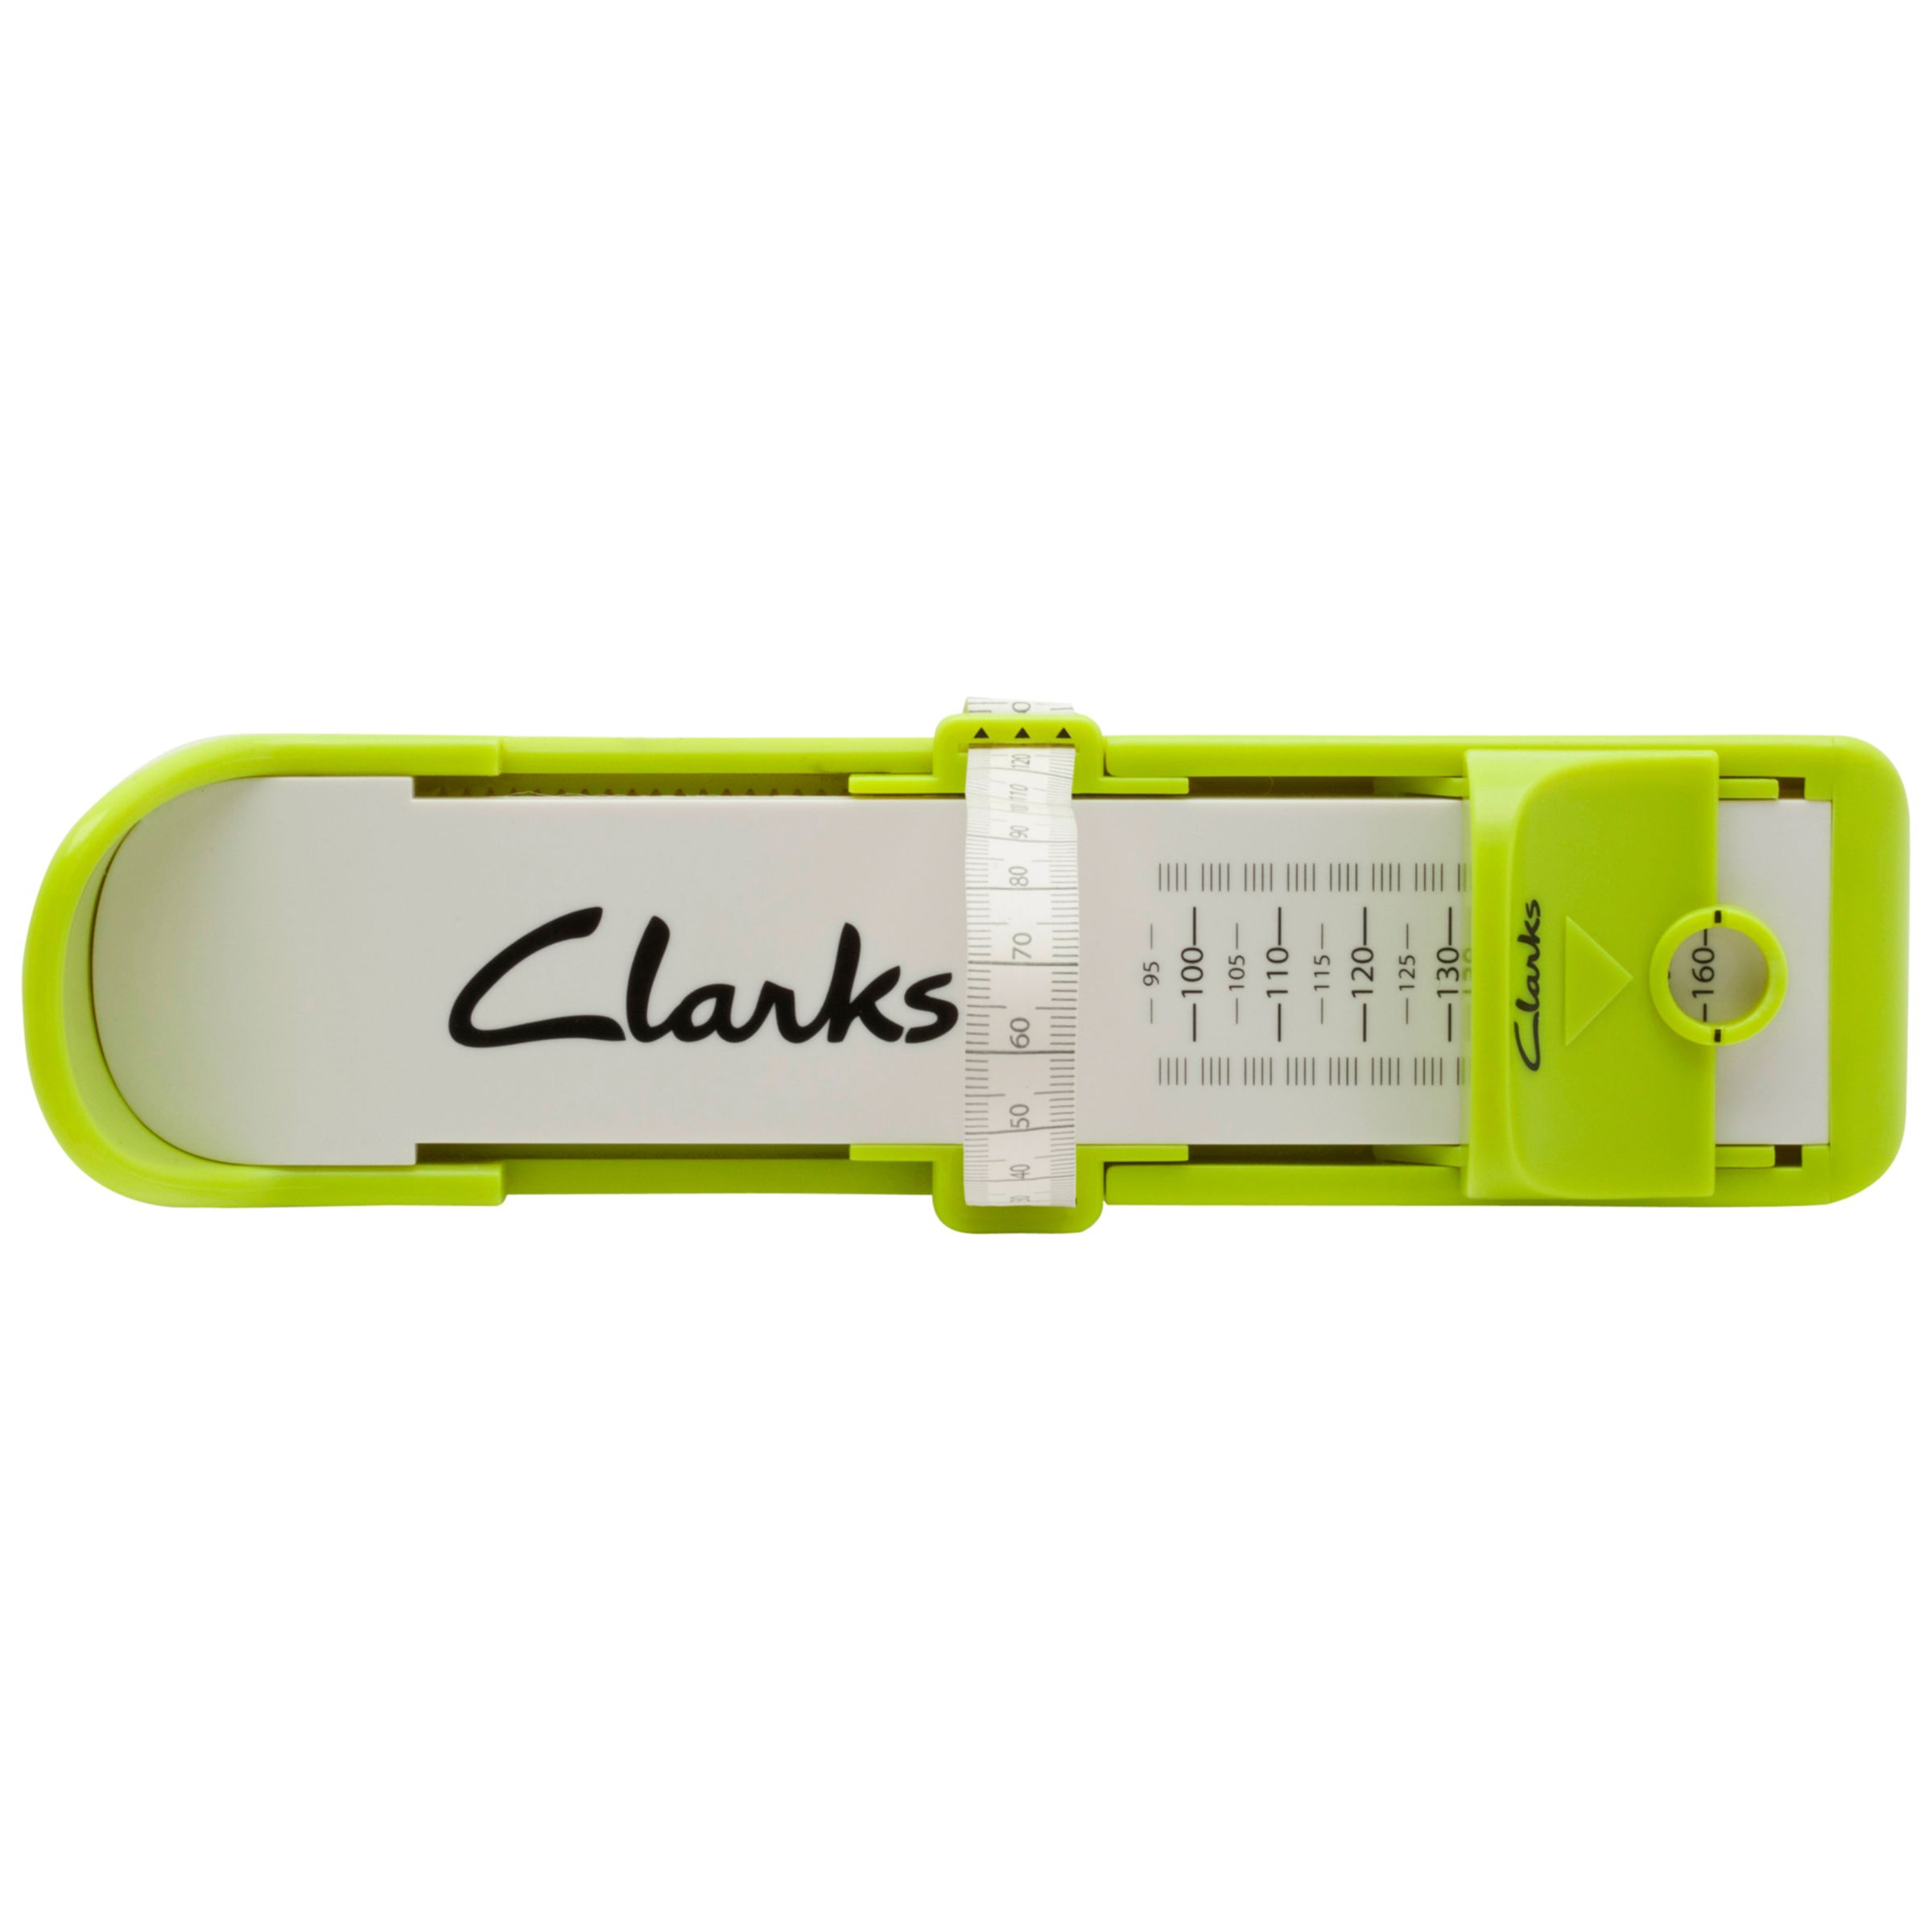 clarks measurements out of range